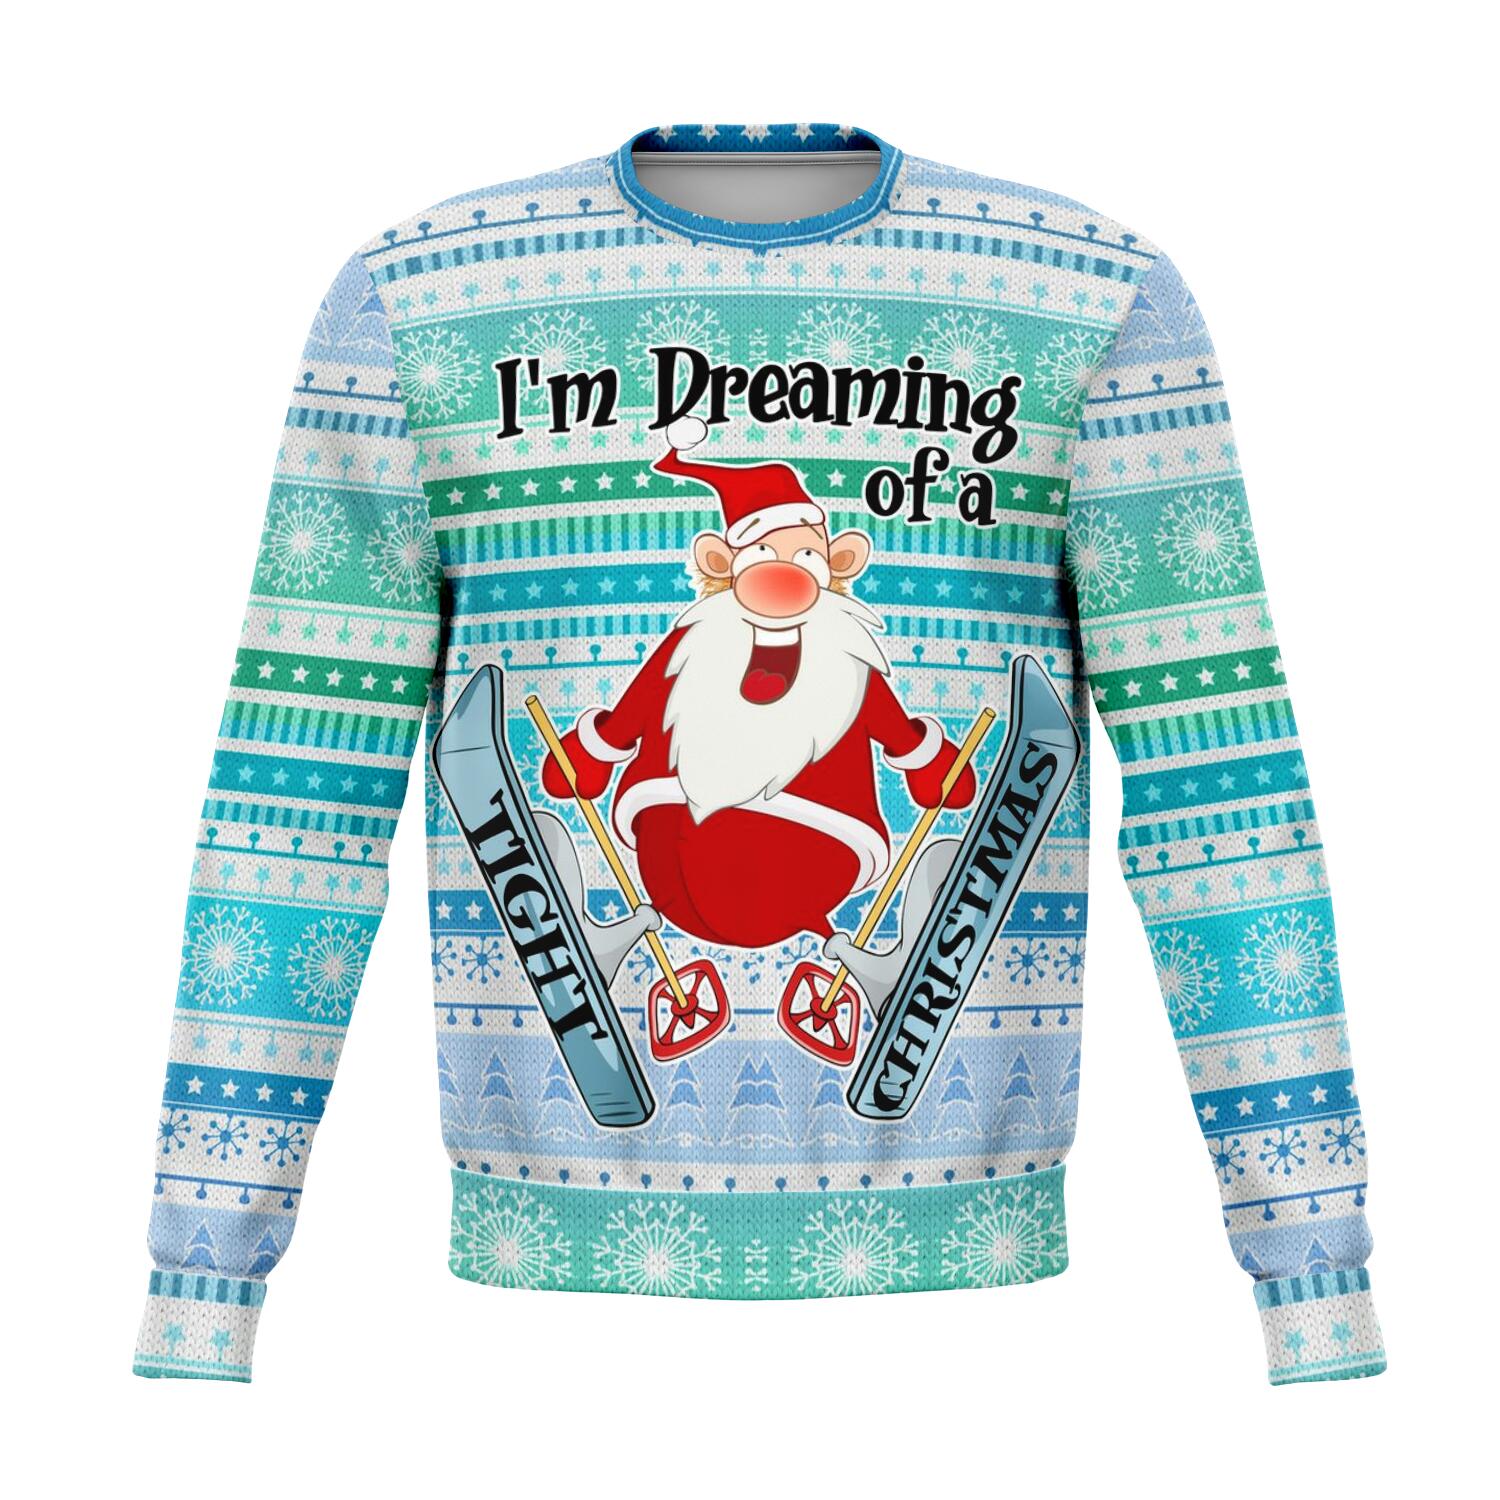 I'm Dreaming Of A Tight Christmas Ugly Christmas Sweater Ski Order By December 5 - Powderaddicts